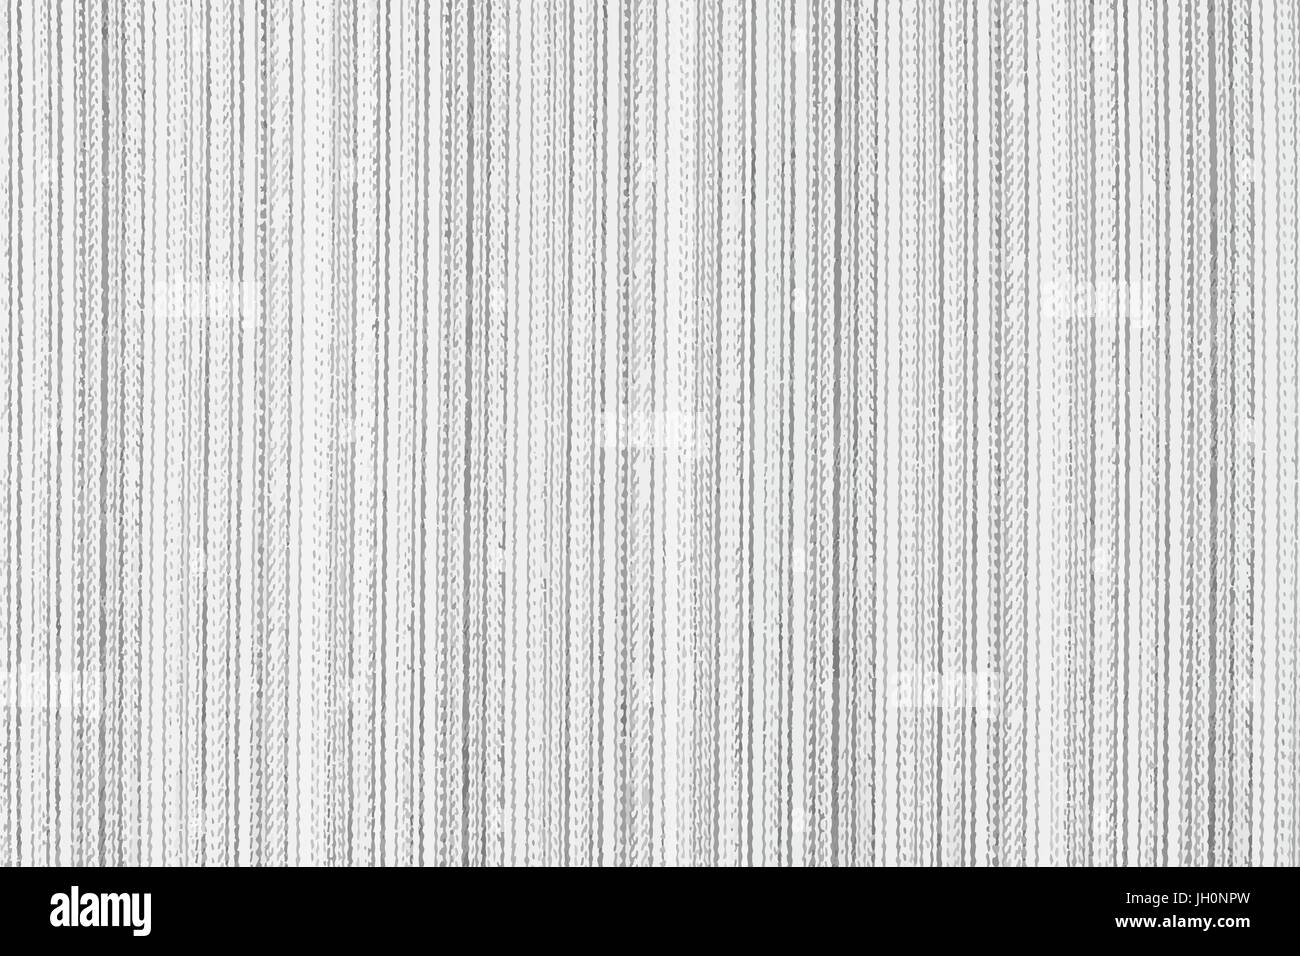 Striped fabric background. Black and white vector texture template for overlay artwork. Stock Vector